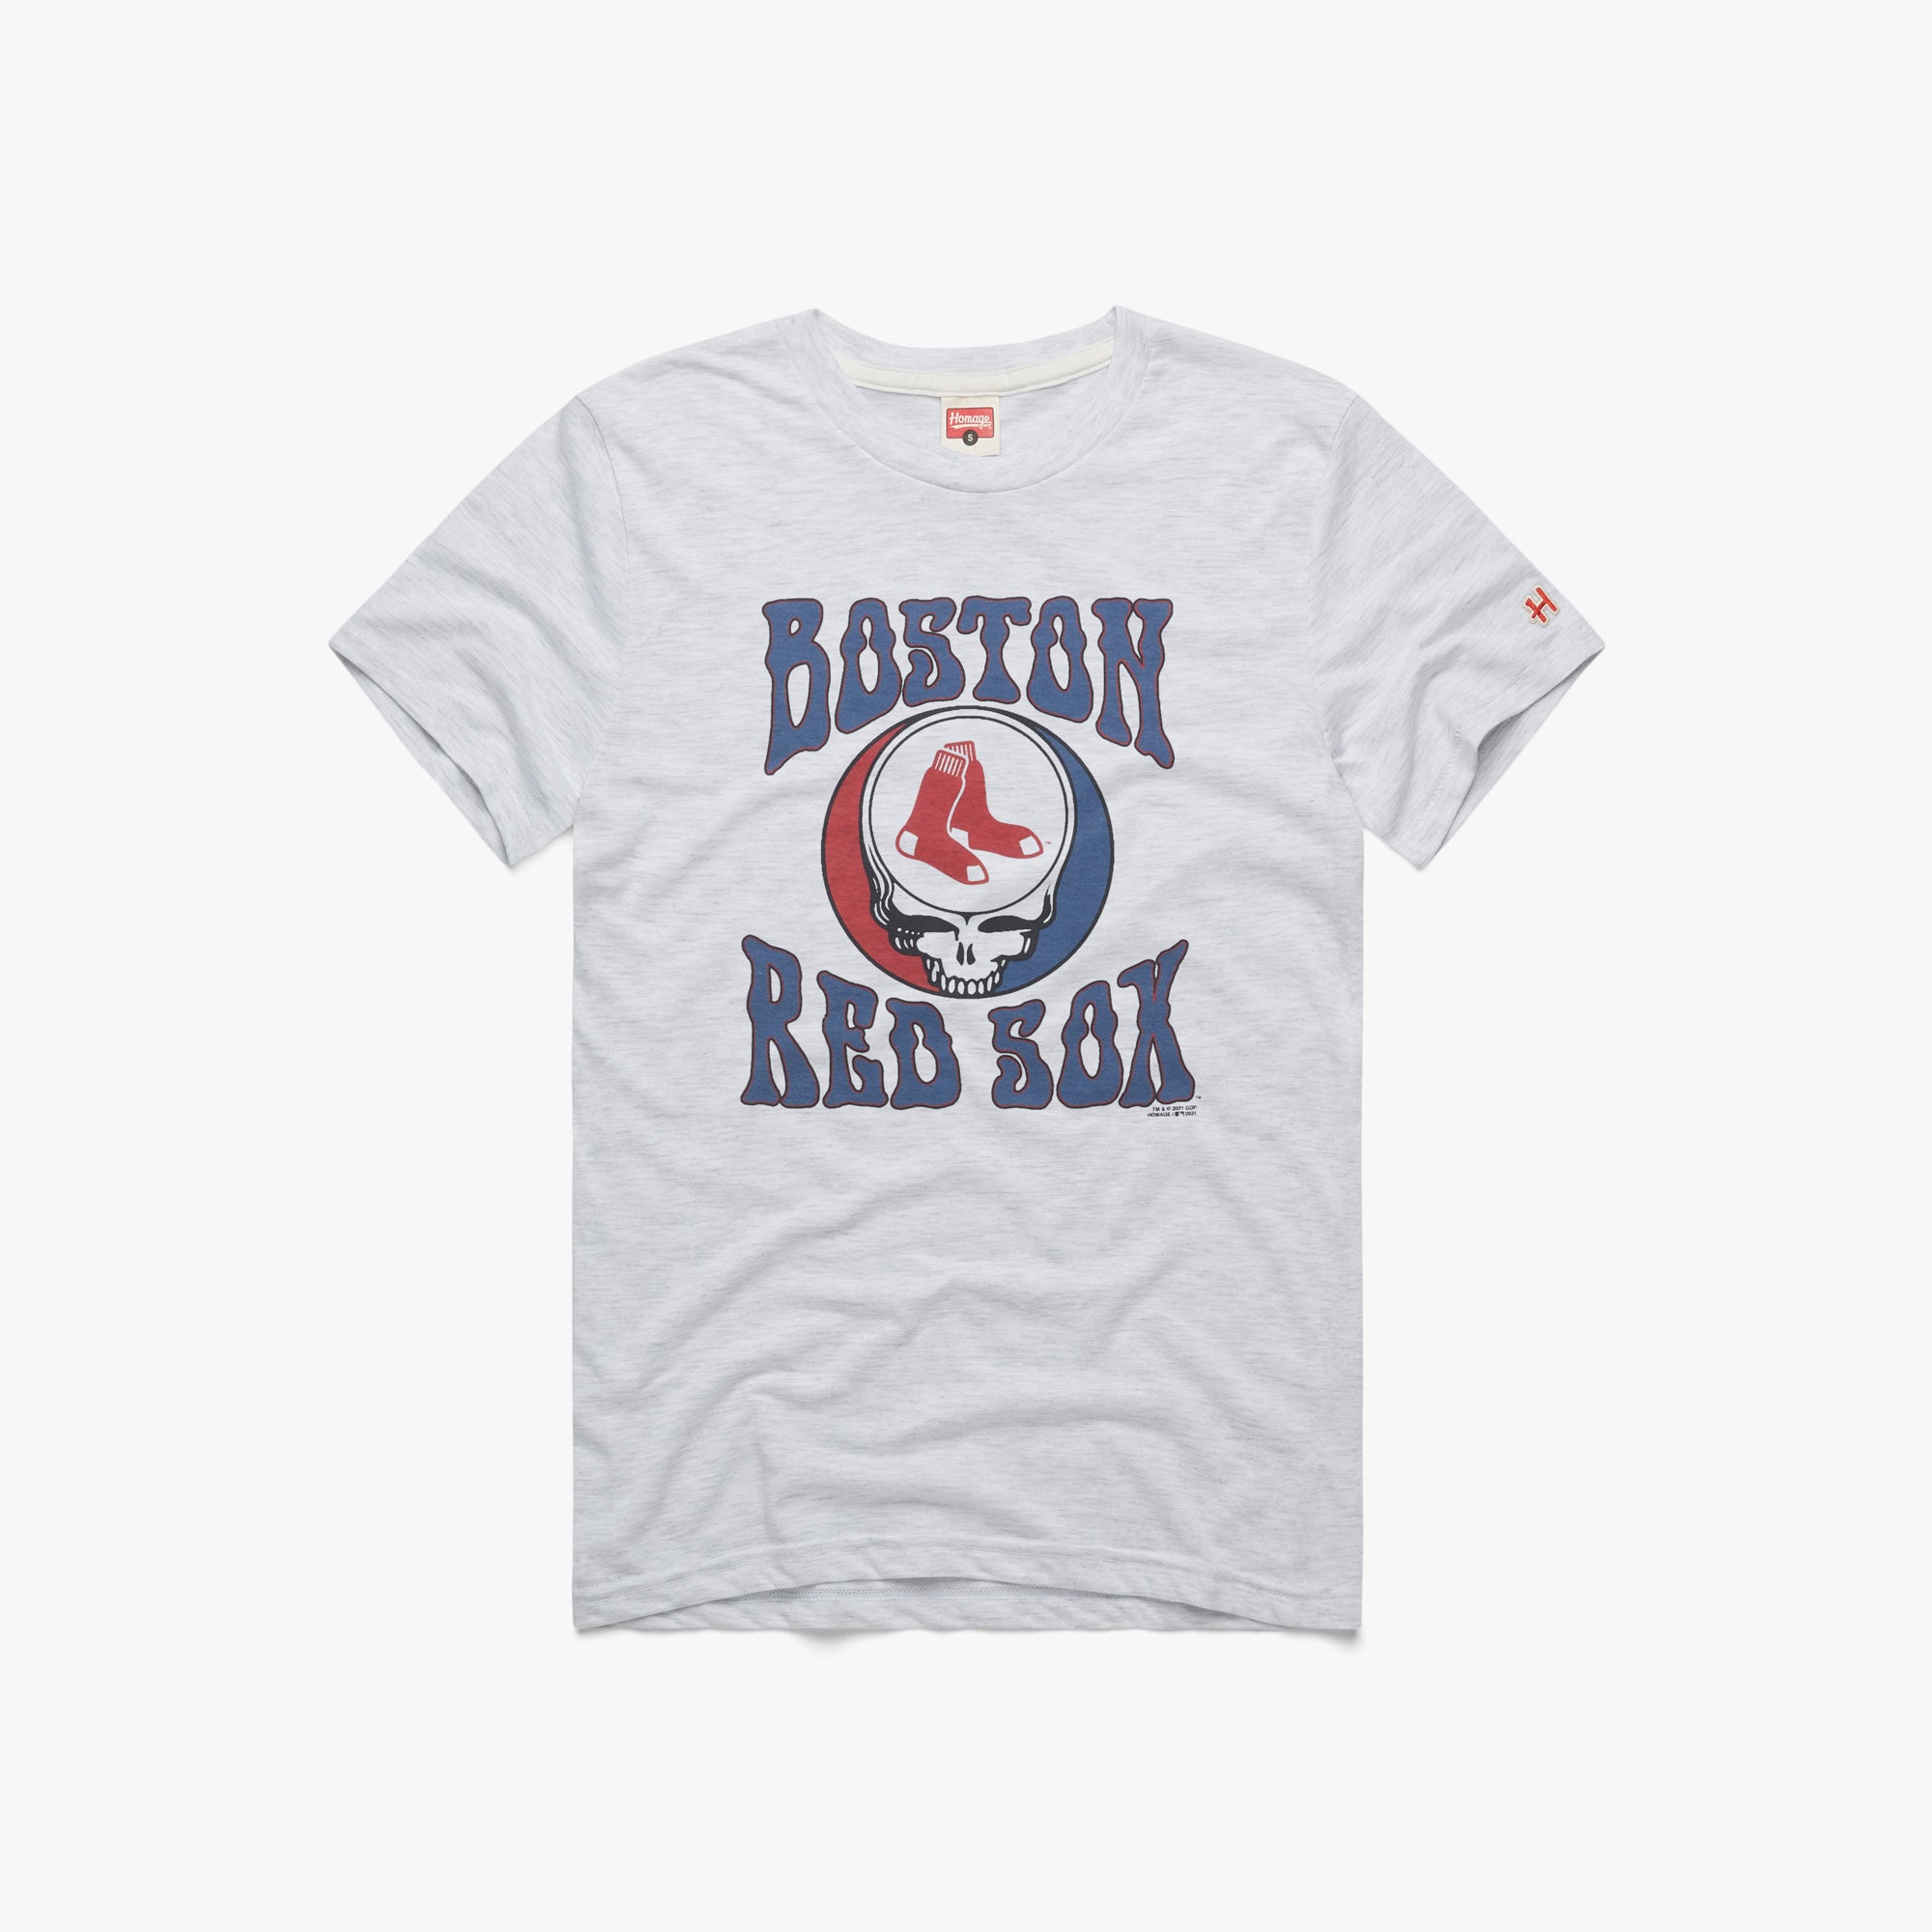 MLB x Grateful Dead x Cardinals T-Shirt from Homage. | Red | Vintage Apparel from Homage.